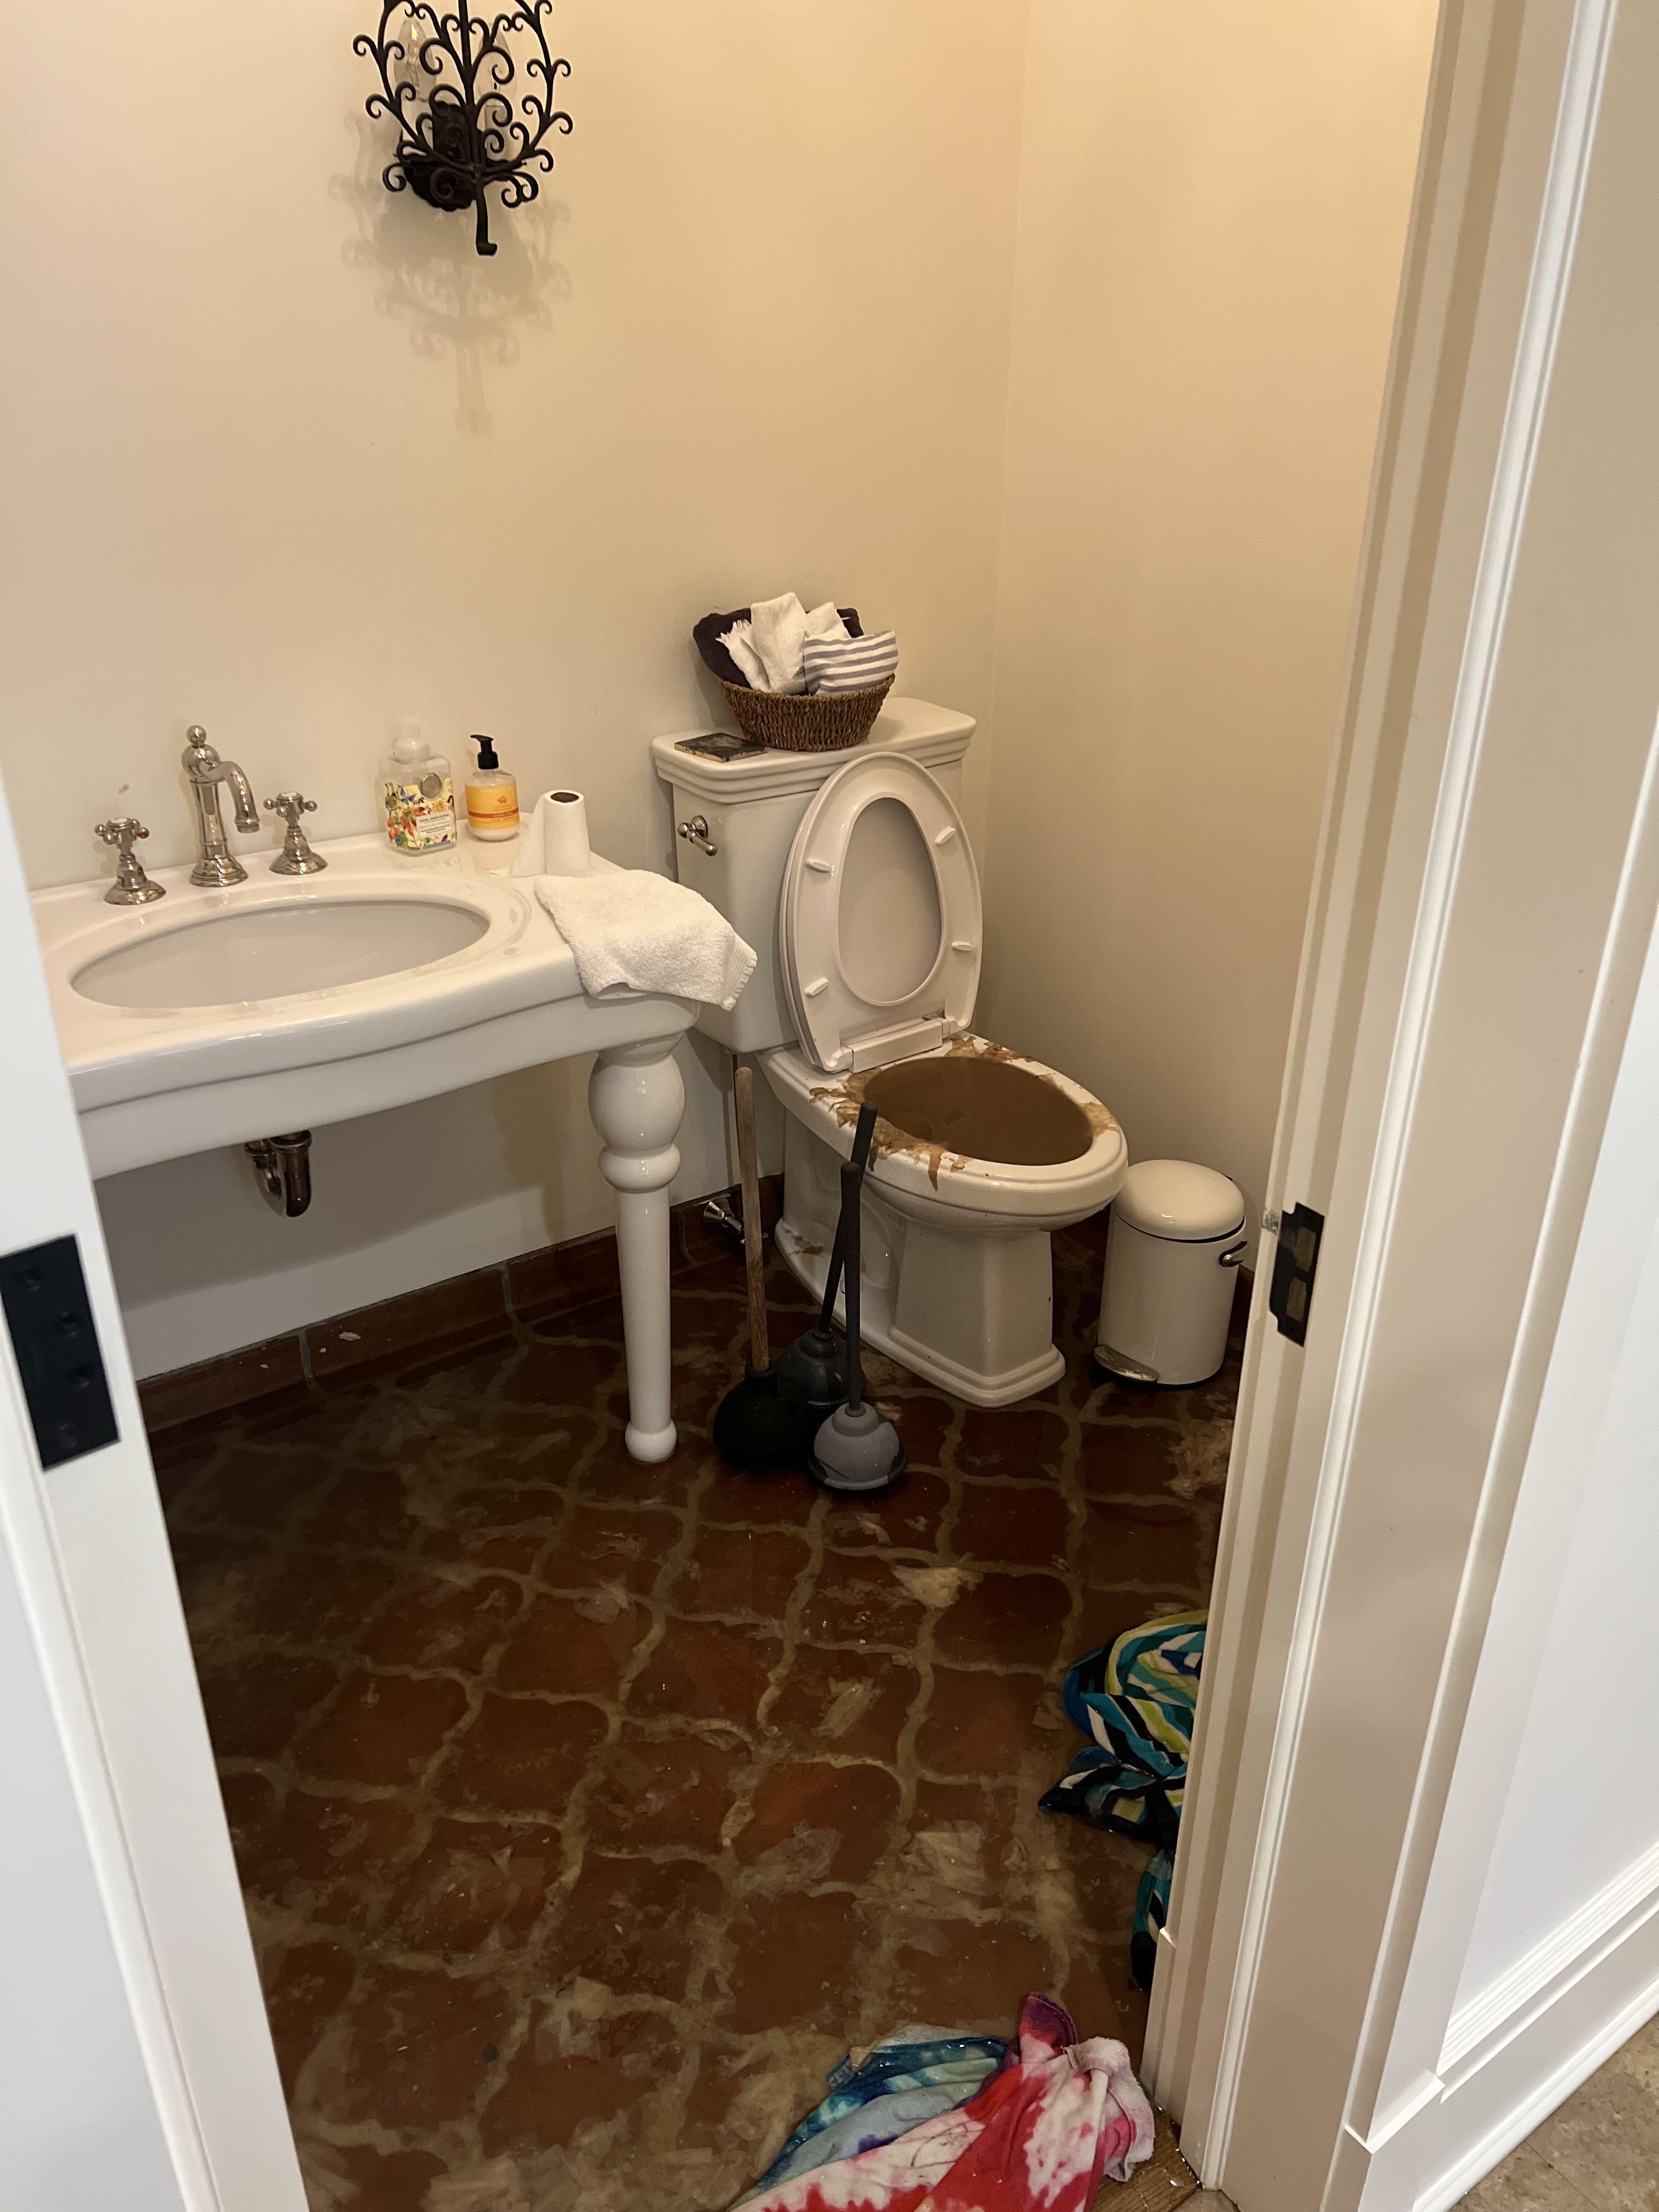 Toilet Overflow Sewage Cleanup in Bedford, NY